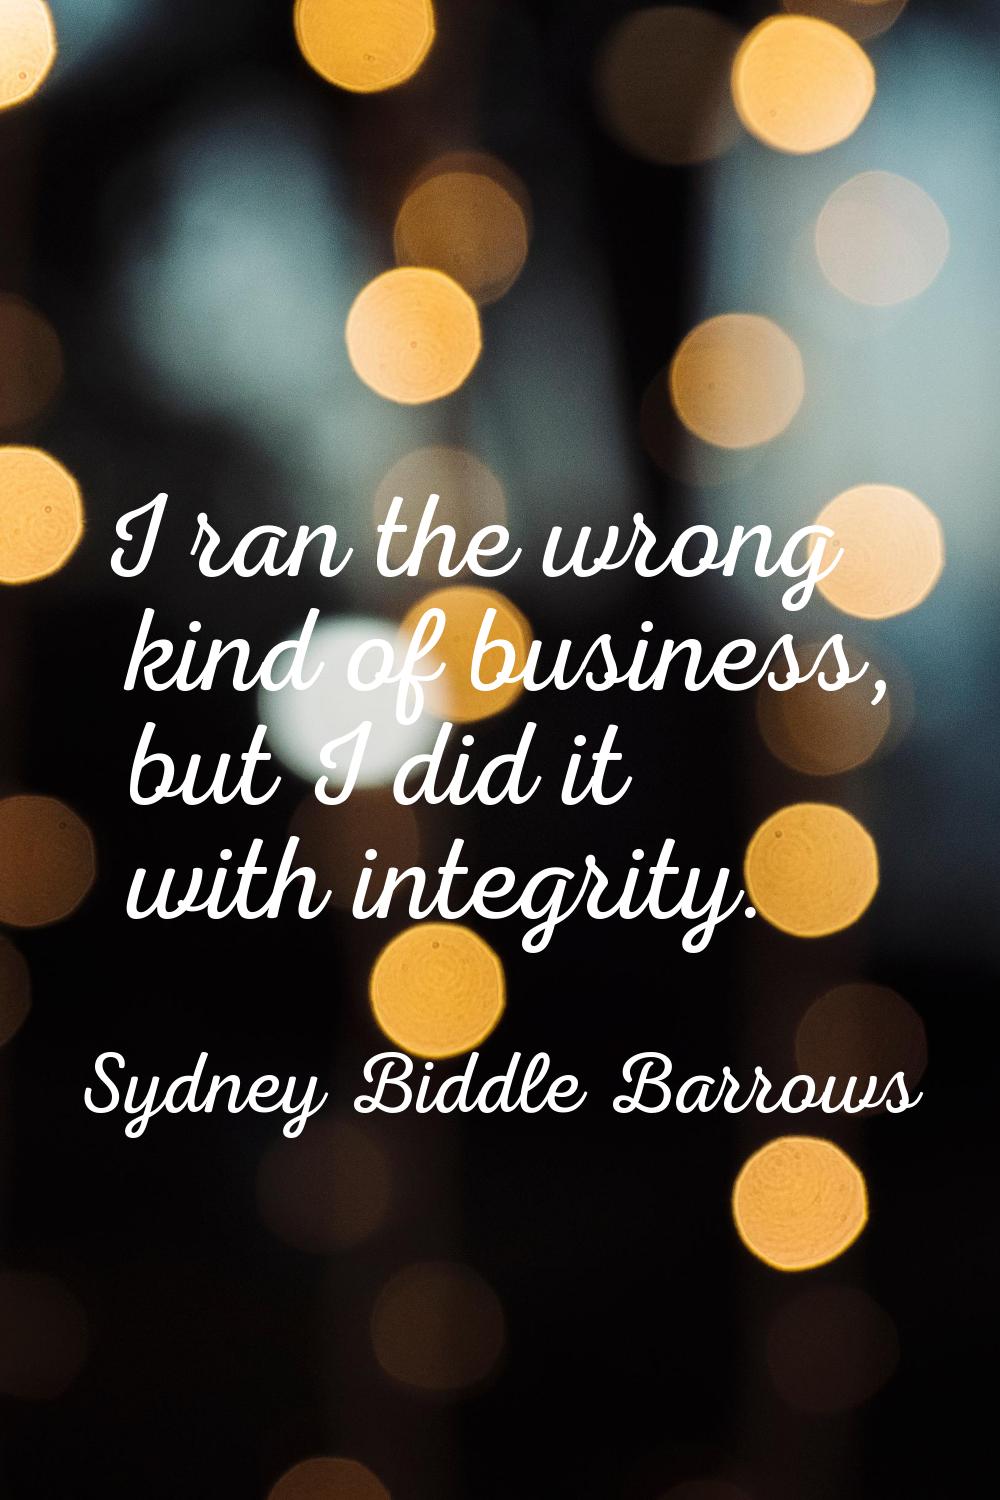 I ran the wrong kind of business, but I did it with integrity.